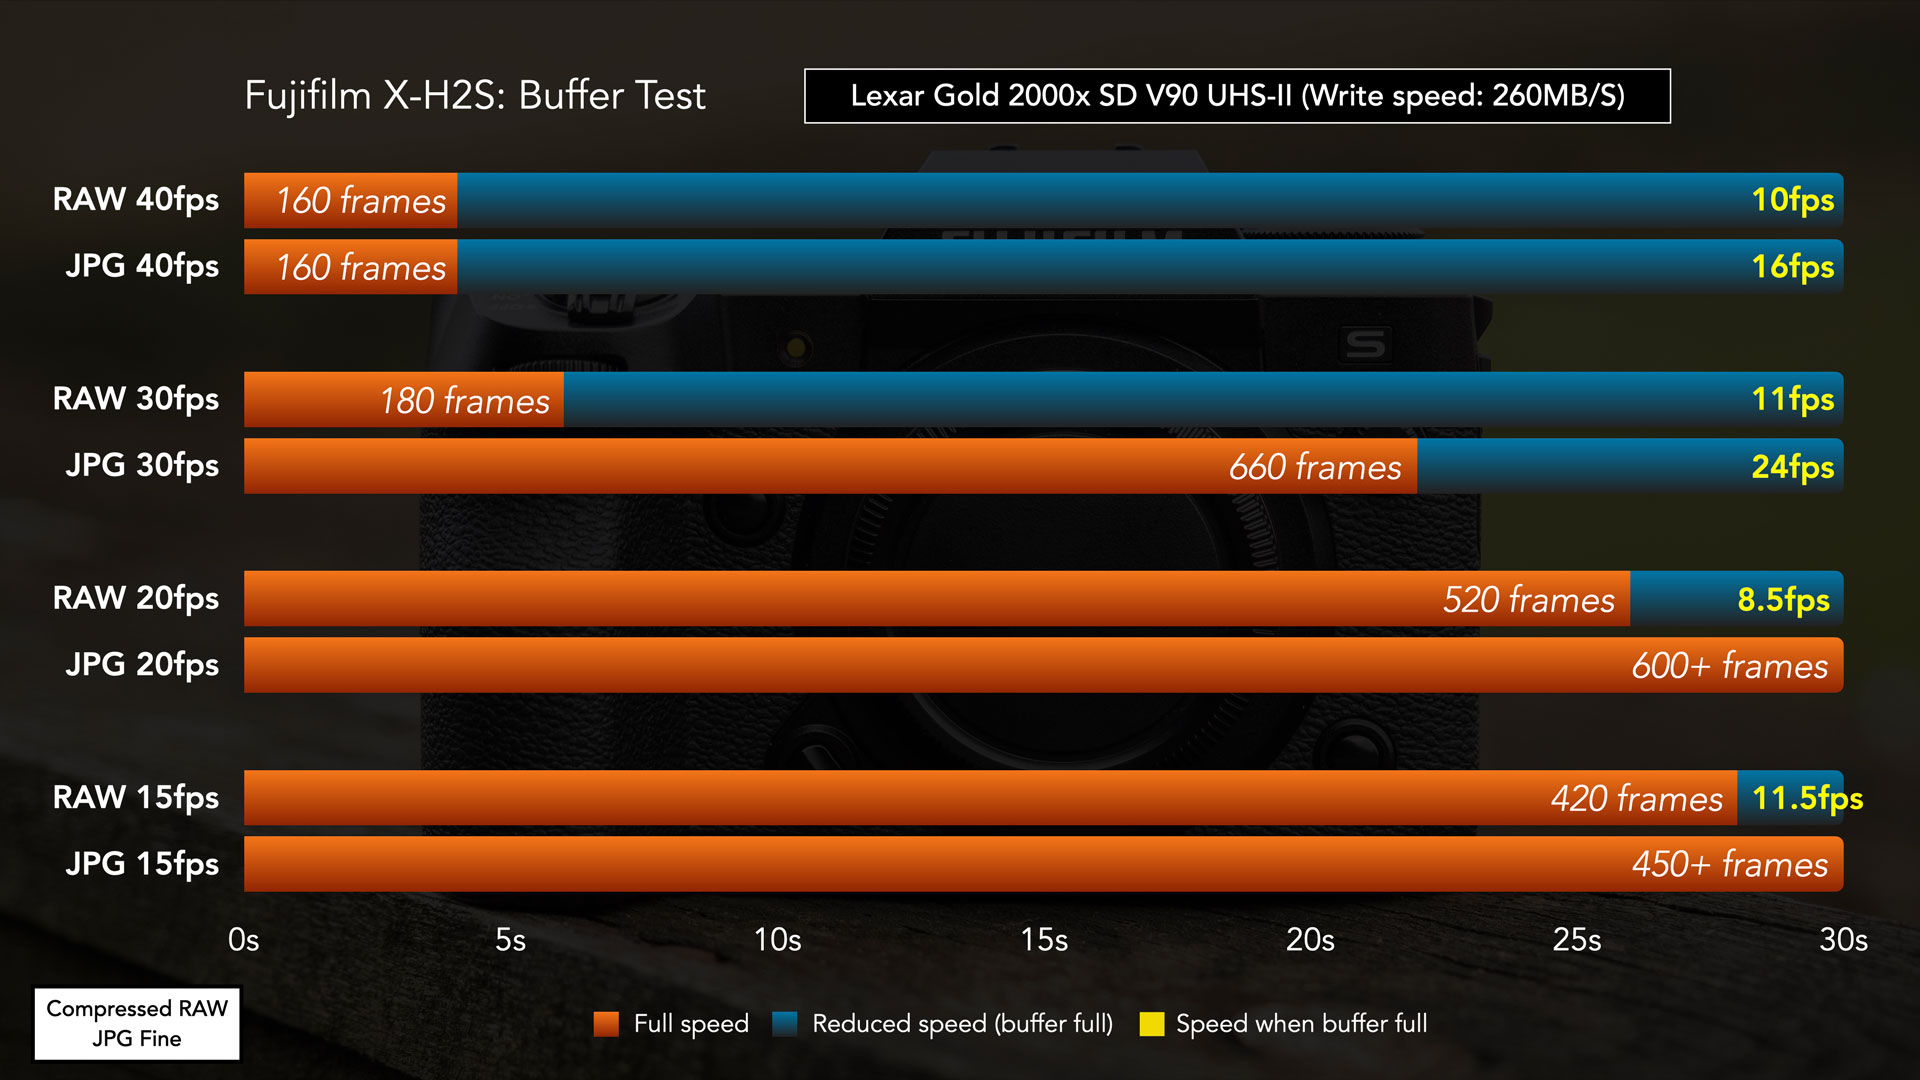 Chart showing the results of the buffer test with the Fuji X-H2S and the Lexar Gold SD card.